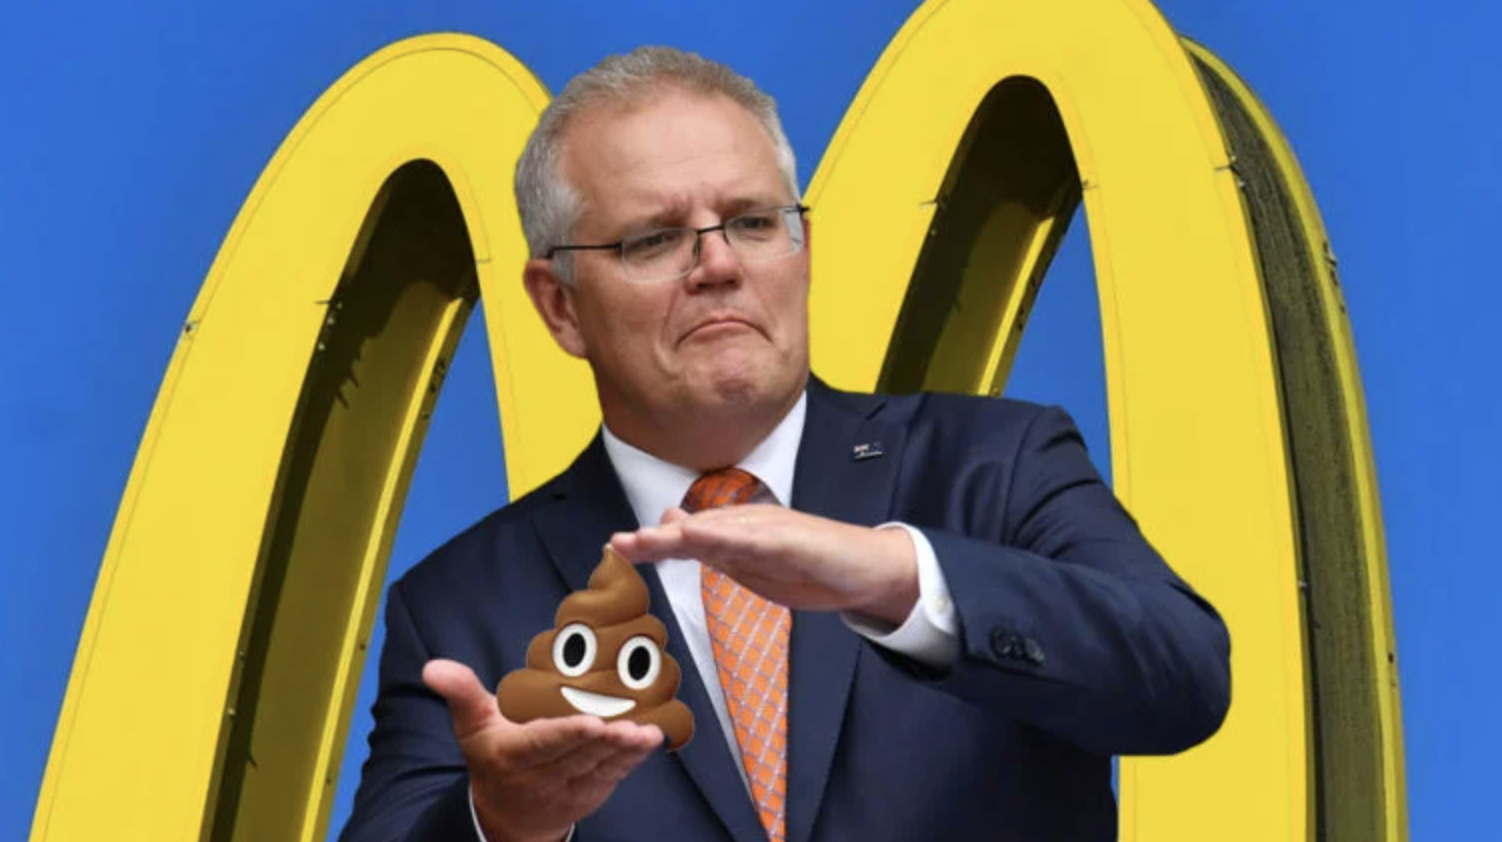 Did The Prime Minister Of Australia Sh*t Himself In A McDonald's?